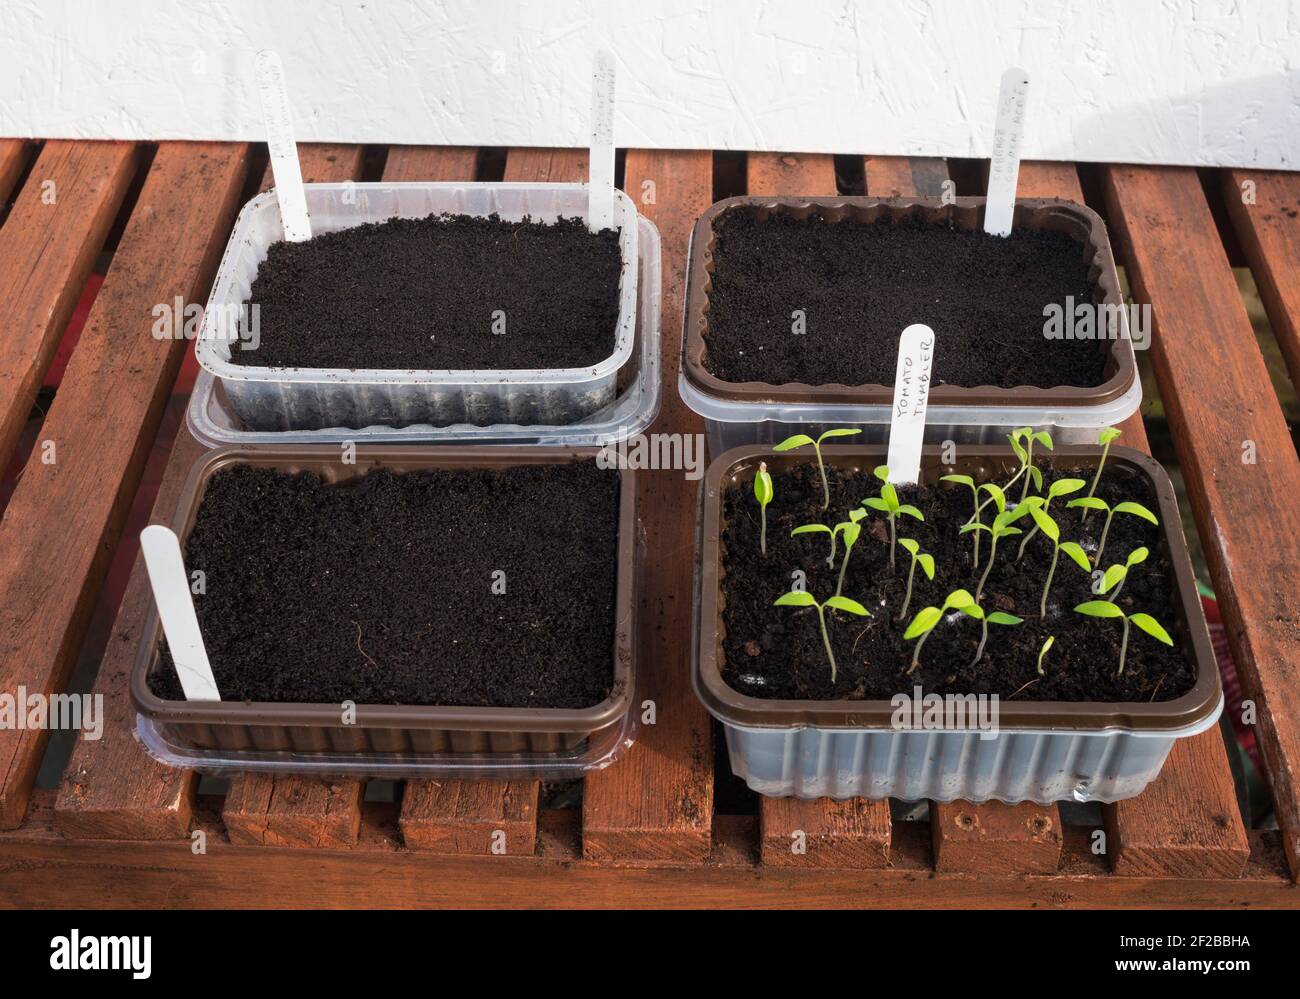 Recycled plastic food containers used to grow seedlings. Stock Photo